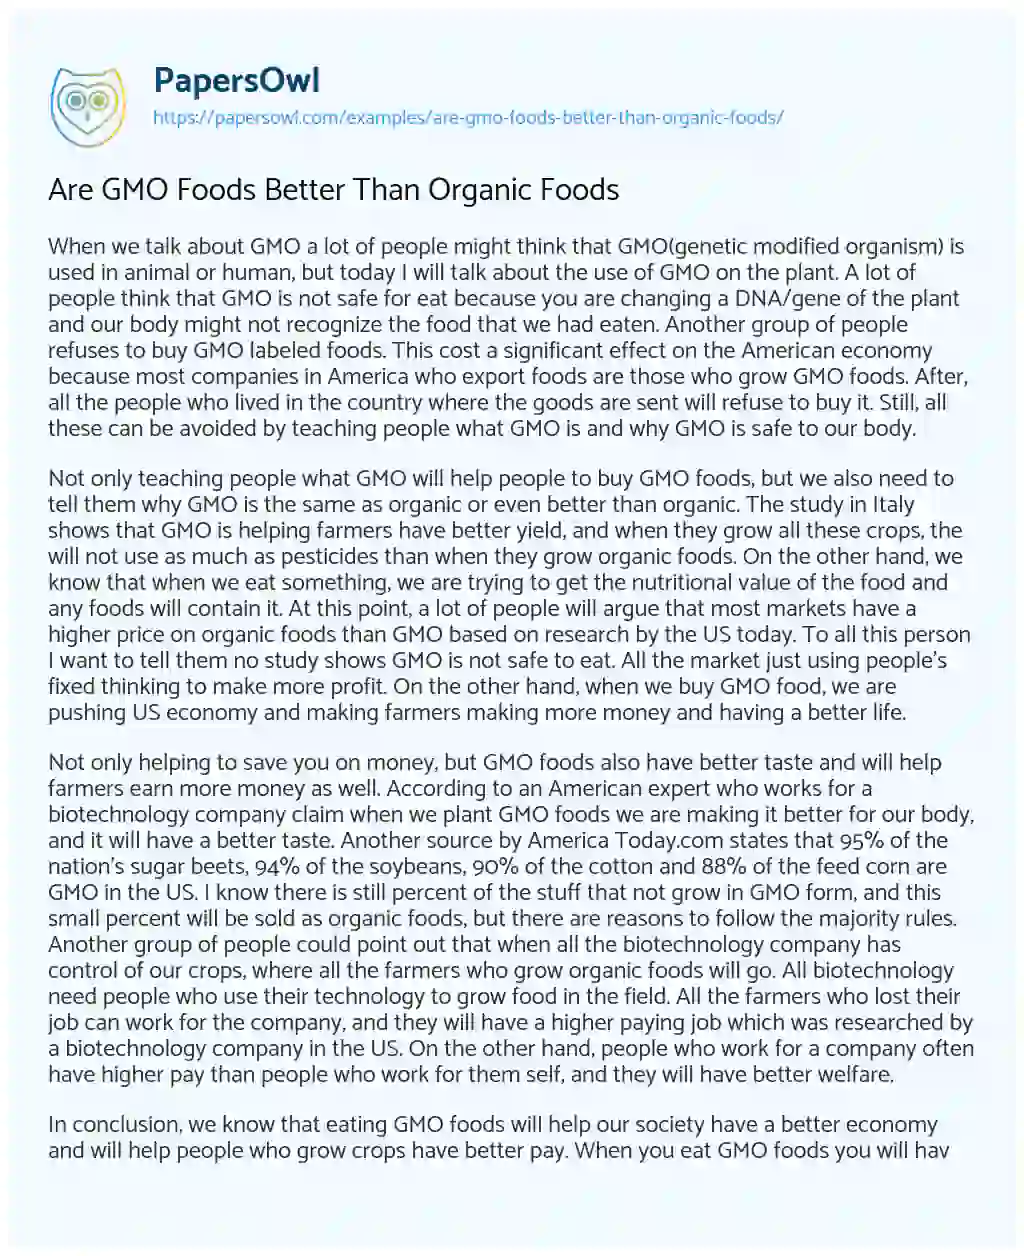 Essay on Are GMO Foods Better than Organic Foods